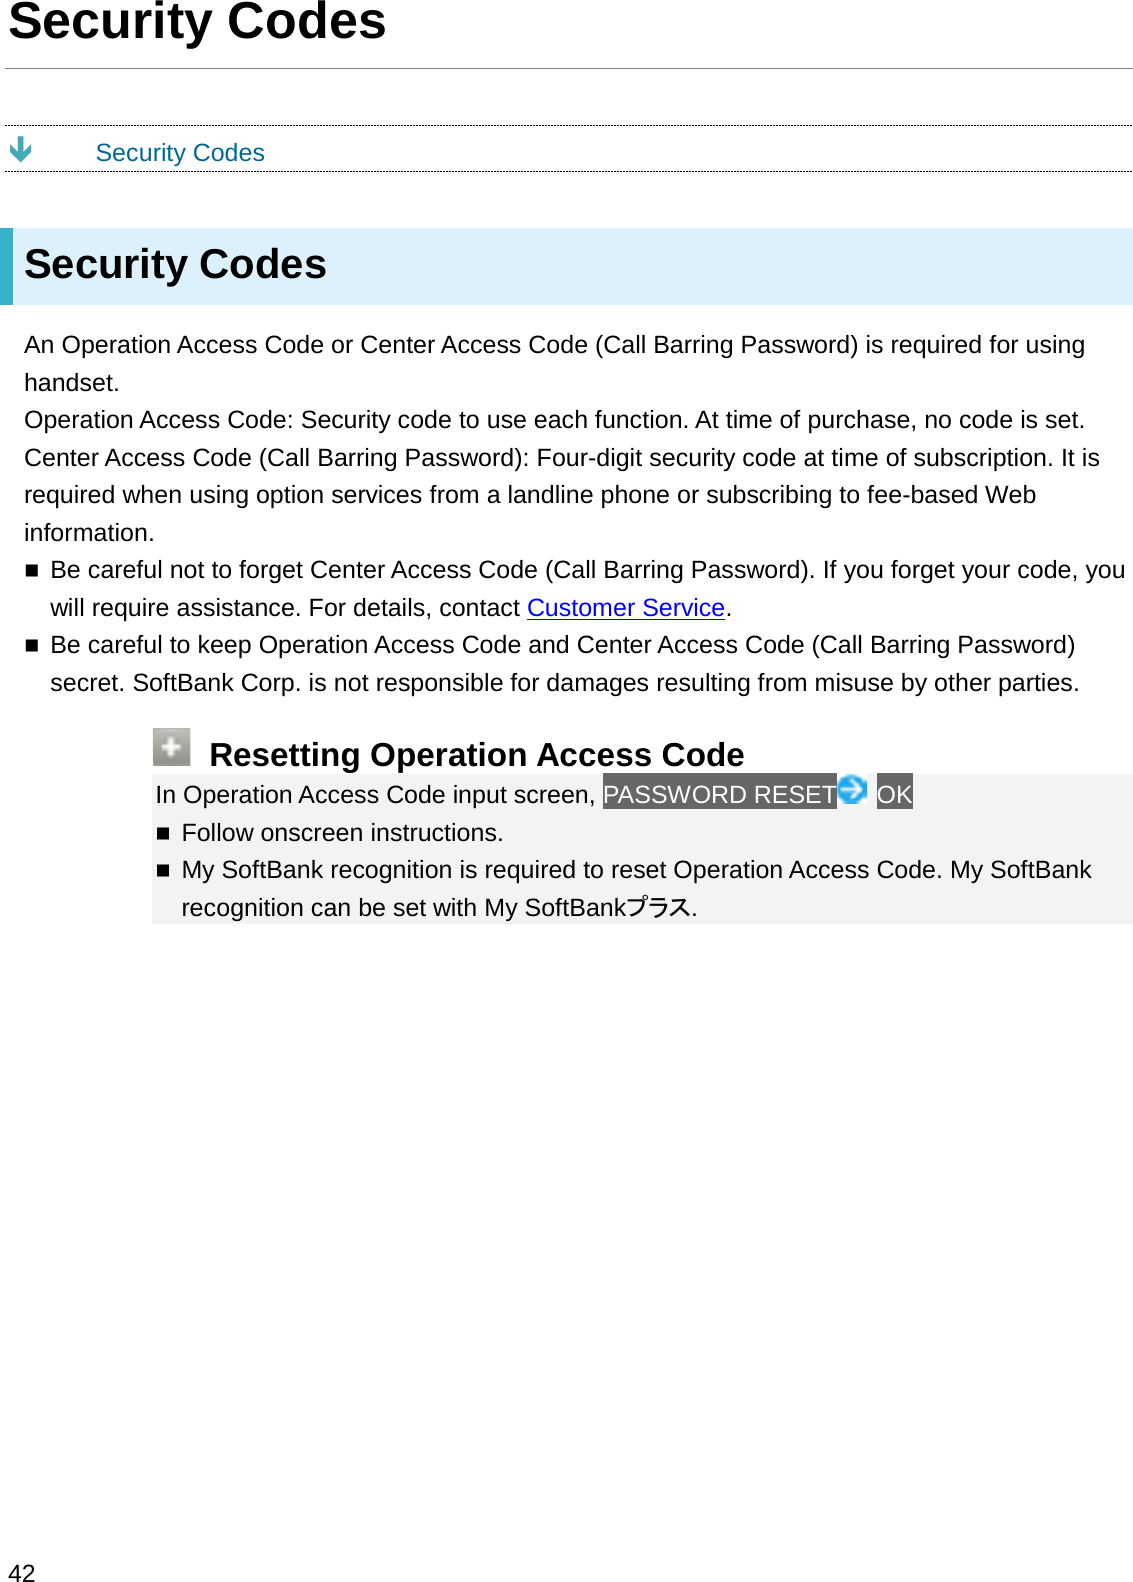 Security CodesÐSecurity CodesSecurity CodesAn Operation Access Code or Center Access Code (Call Barring Password) is required for using handset.Operation Access Code: Security code to use each function. At time of purchase, no code is set.Center Access Code (Call Barring Password): Four-digit security code at time of subscription. It is required when using option services from a landline phone or subscribing to fee-based Web information.Be careful not to forget Center Access Code (Call Barring Password). If you forget your code, you will require assistance. For details, contact Customer Service.Be careful to keep Operation Access Code and Center Access Code (Call Barring Password) secret. SoftBank Corp. is not responsible for damages resulting from misuse by other parties.Resetting Operation Access CodeIn Operation Access Code input screen, PASSWORD RESET OKFollow onscreen instructions.My SoftBank recognition is required to reset Operation Access Code. My SoftBank recognition can be set with My SoftBank䝥䝷䝇.42